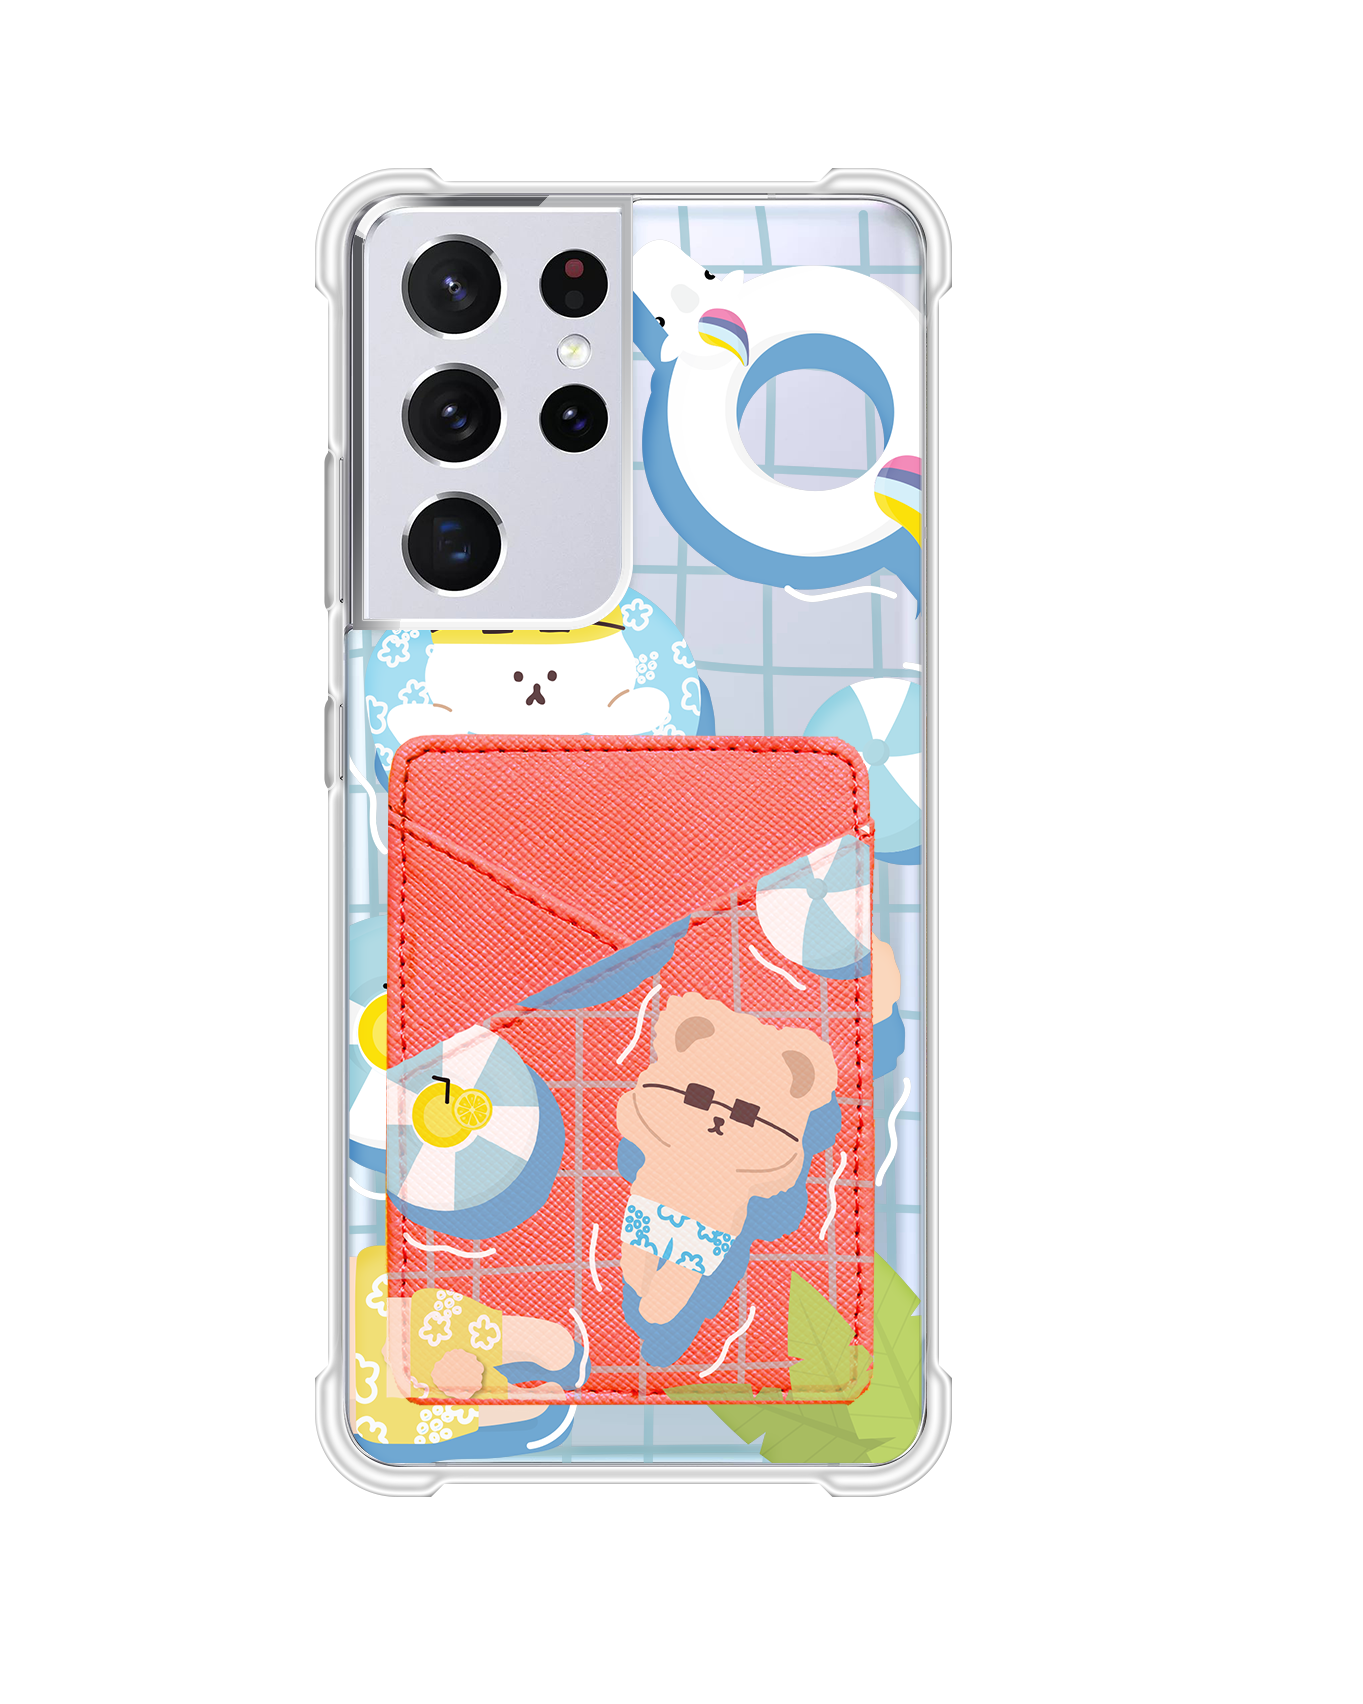 Android Phone Wallet Case - Pool Party 1.0